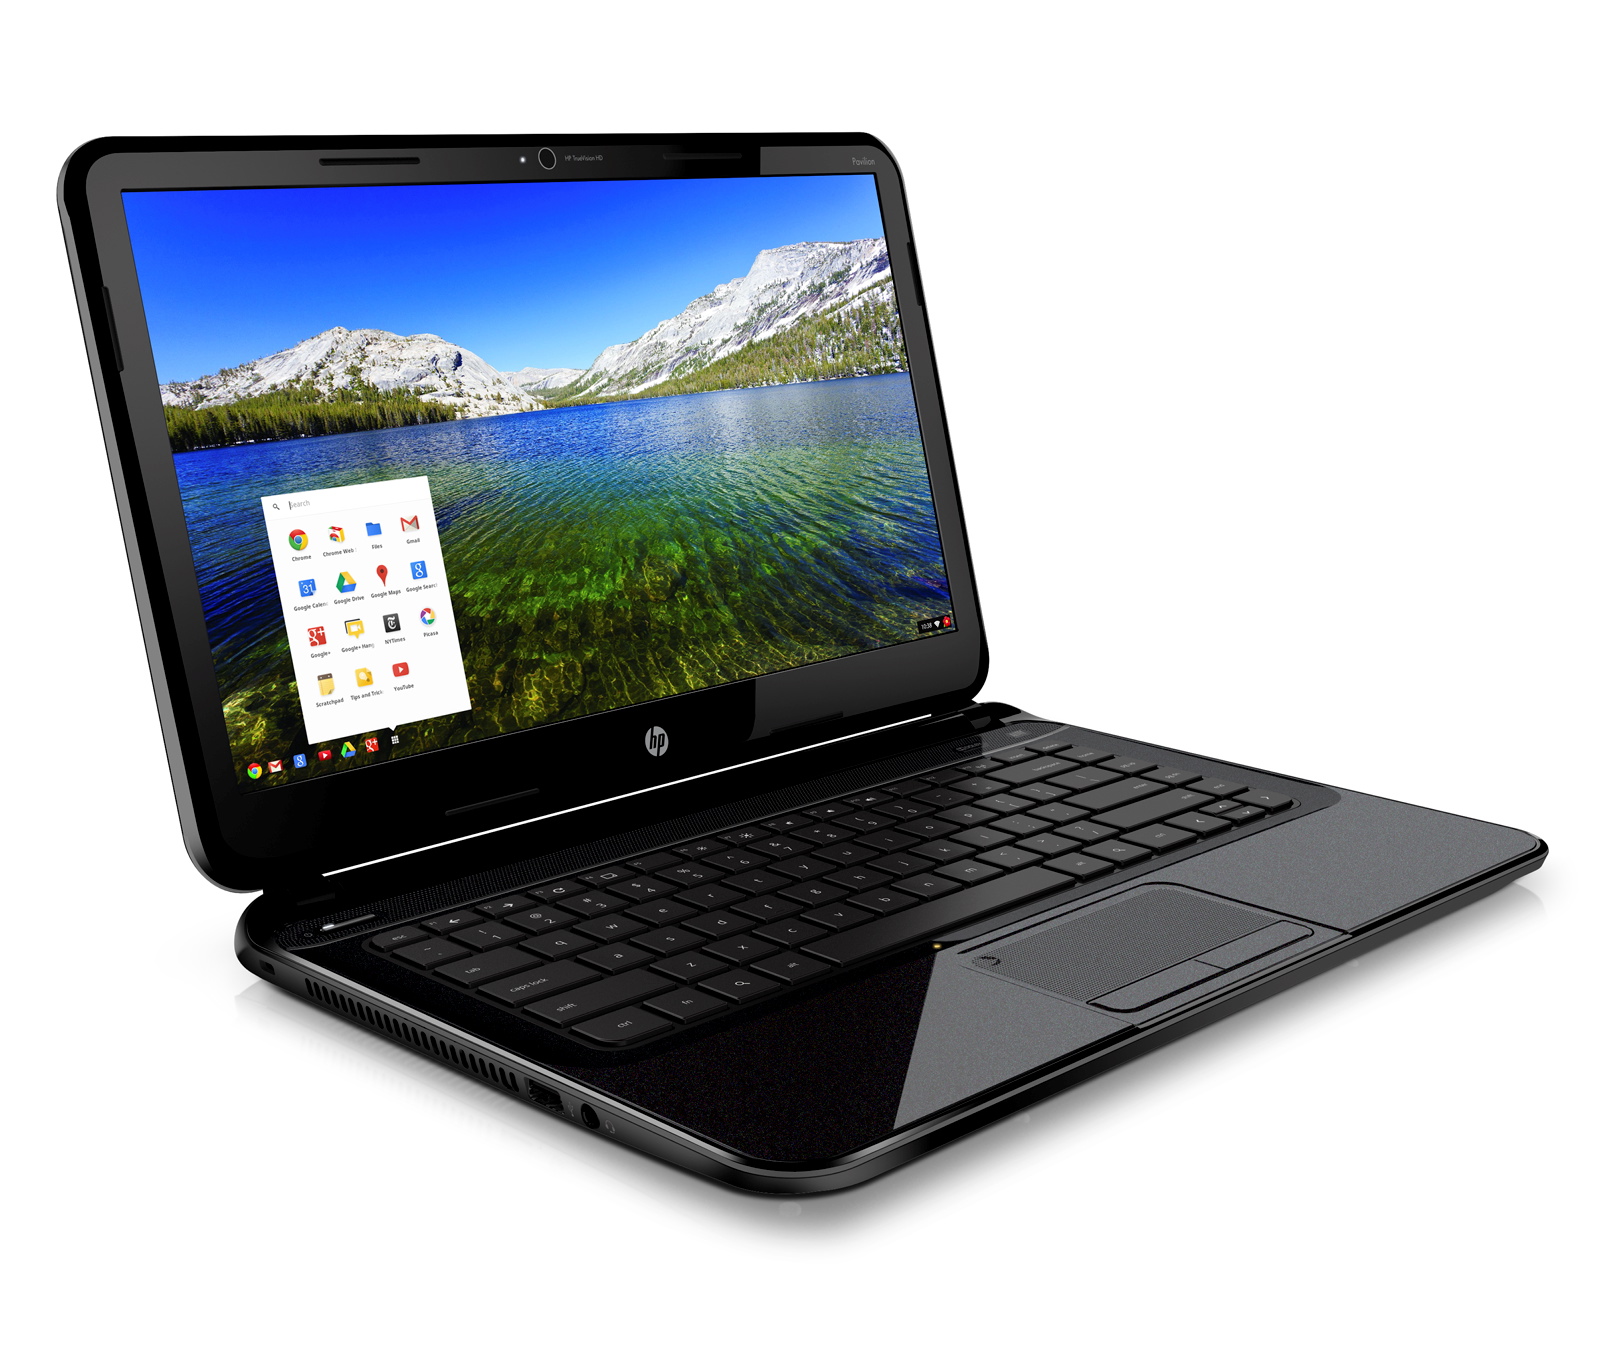 The 14-Inch HP Chromebook Is Official, Could Become a Big Seller